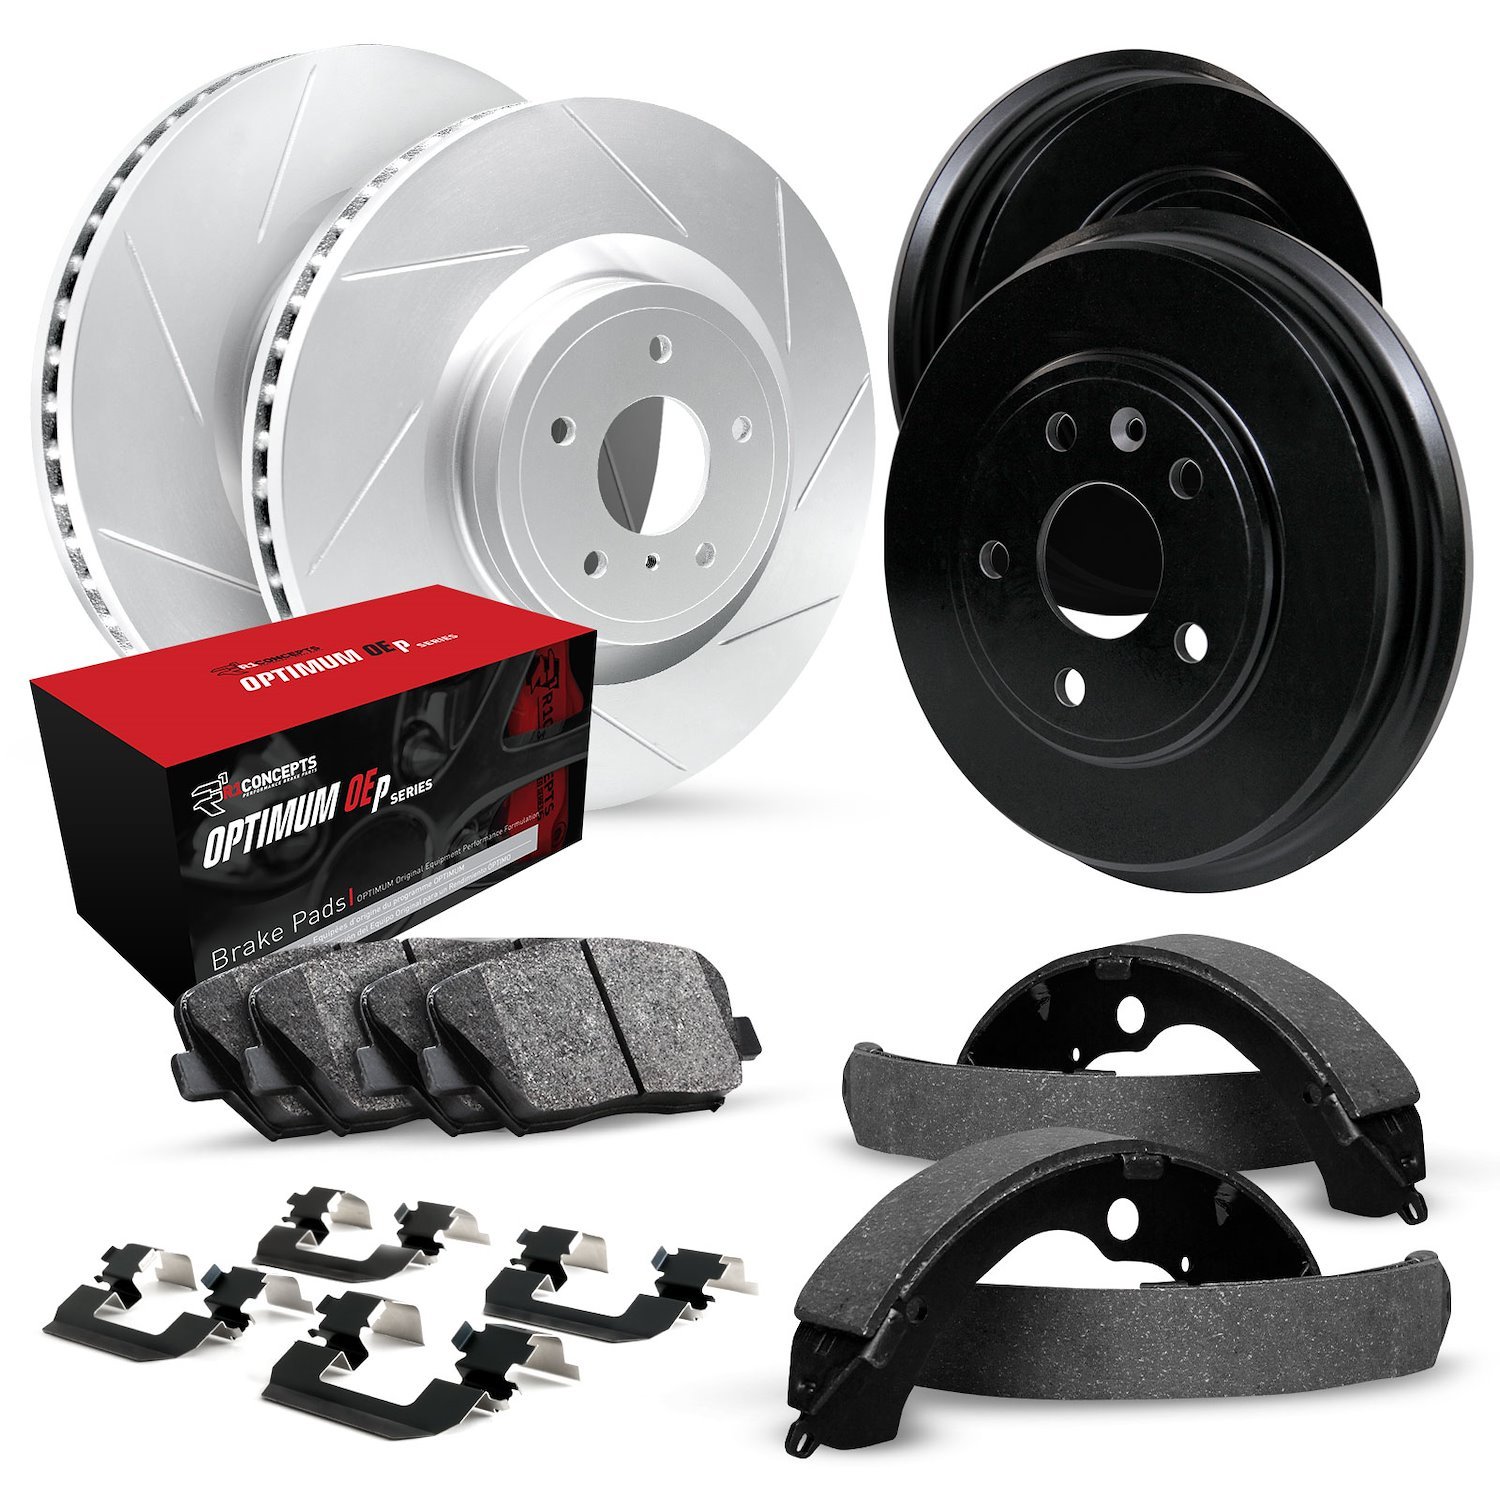 GEO-Carbon Slotted Brake Rotor & Drum Set w/Optimum OE Pads, Shoes, & Hardware, 2001-2002 Ford/Lincoln/Mercury/Mazda